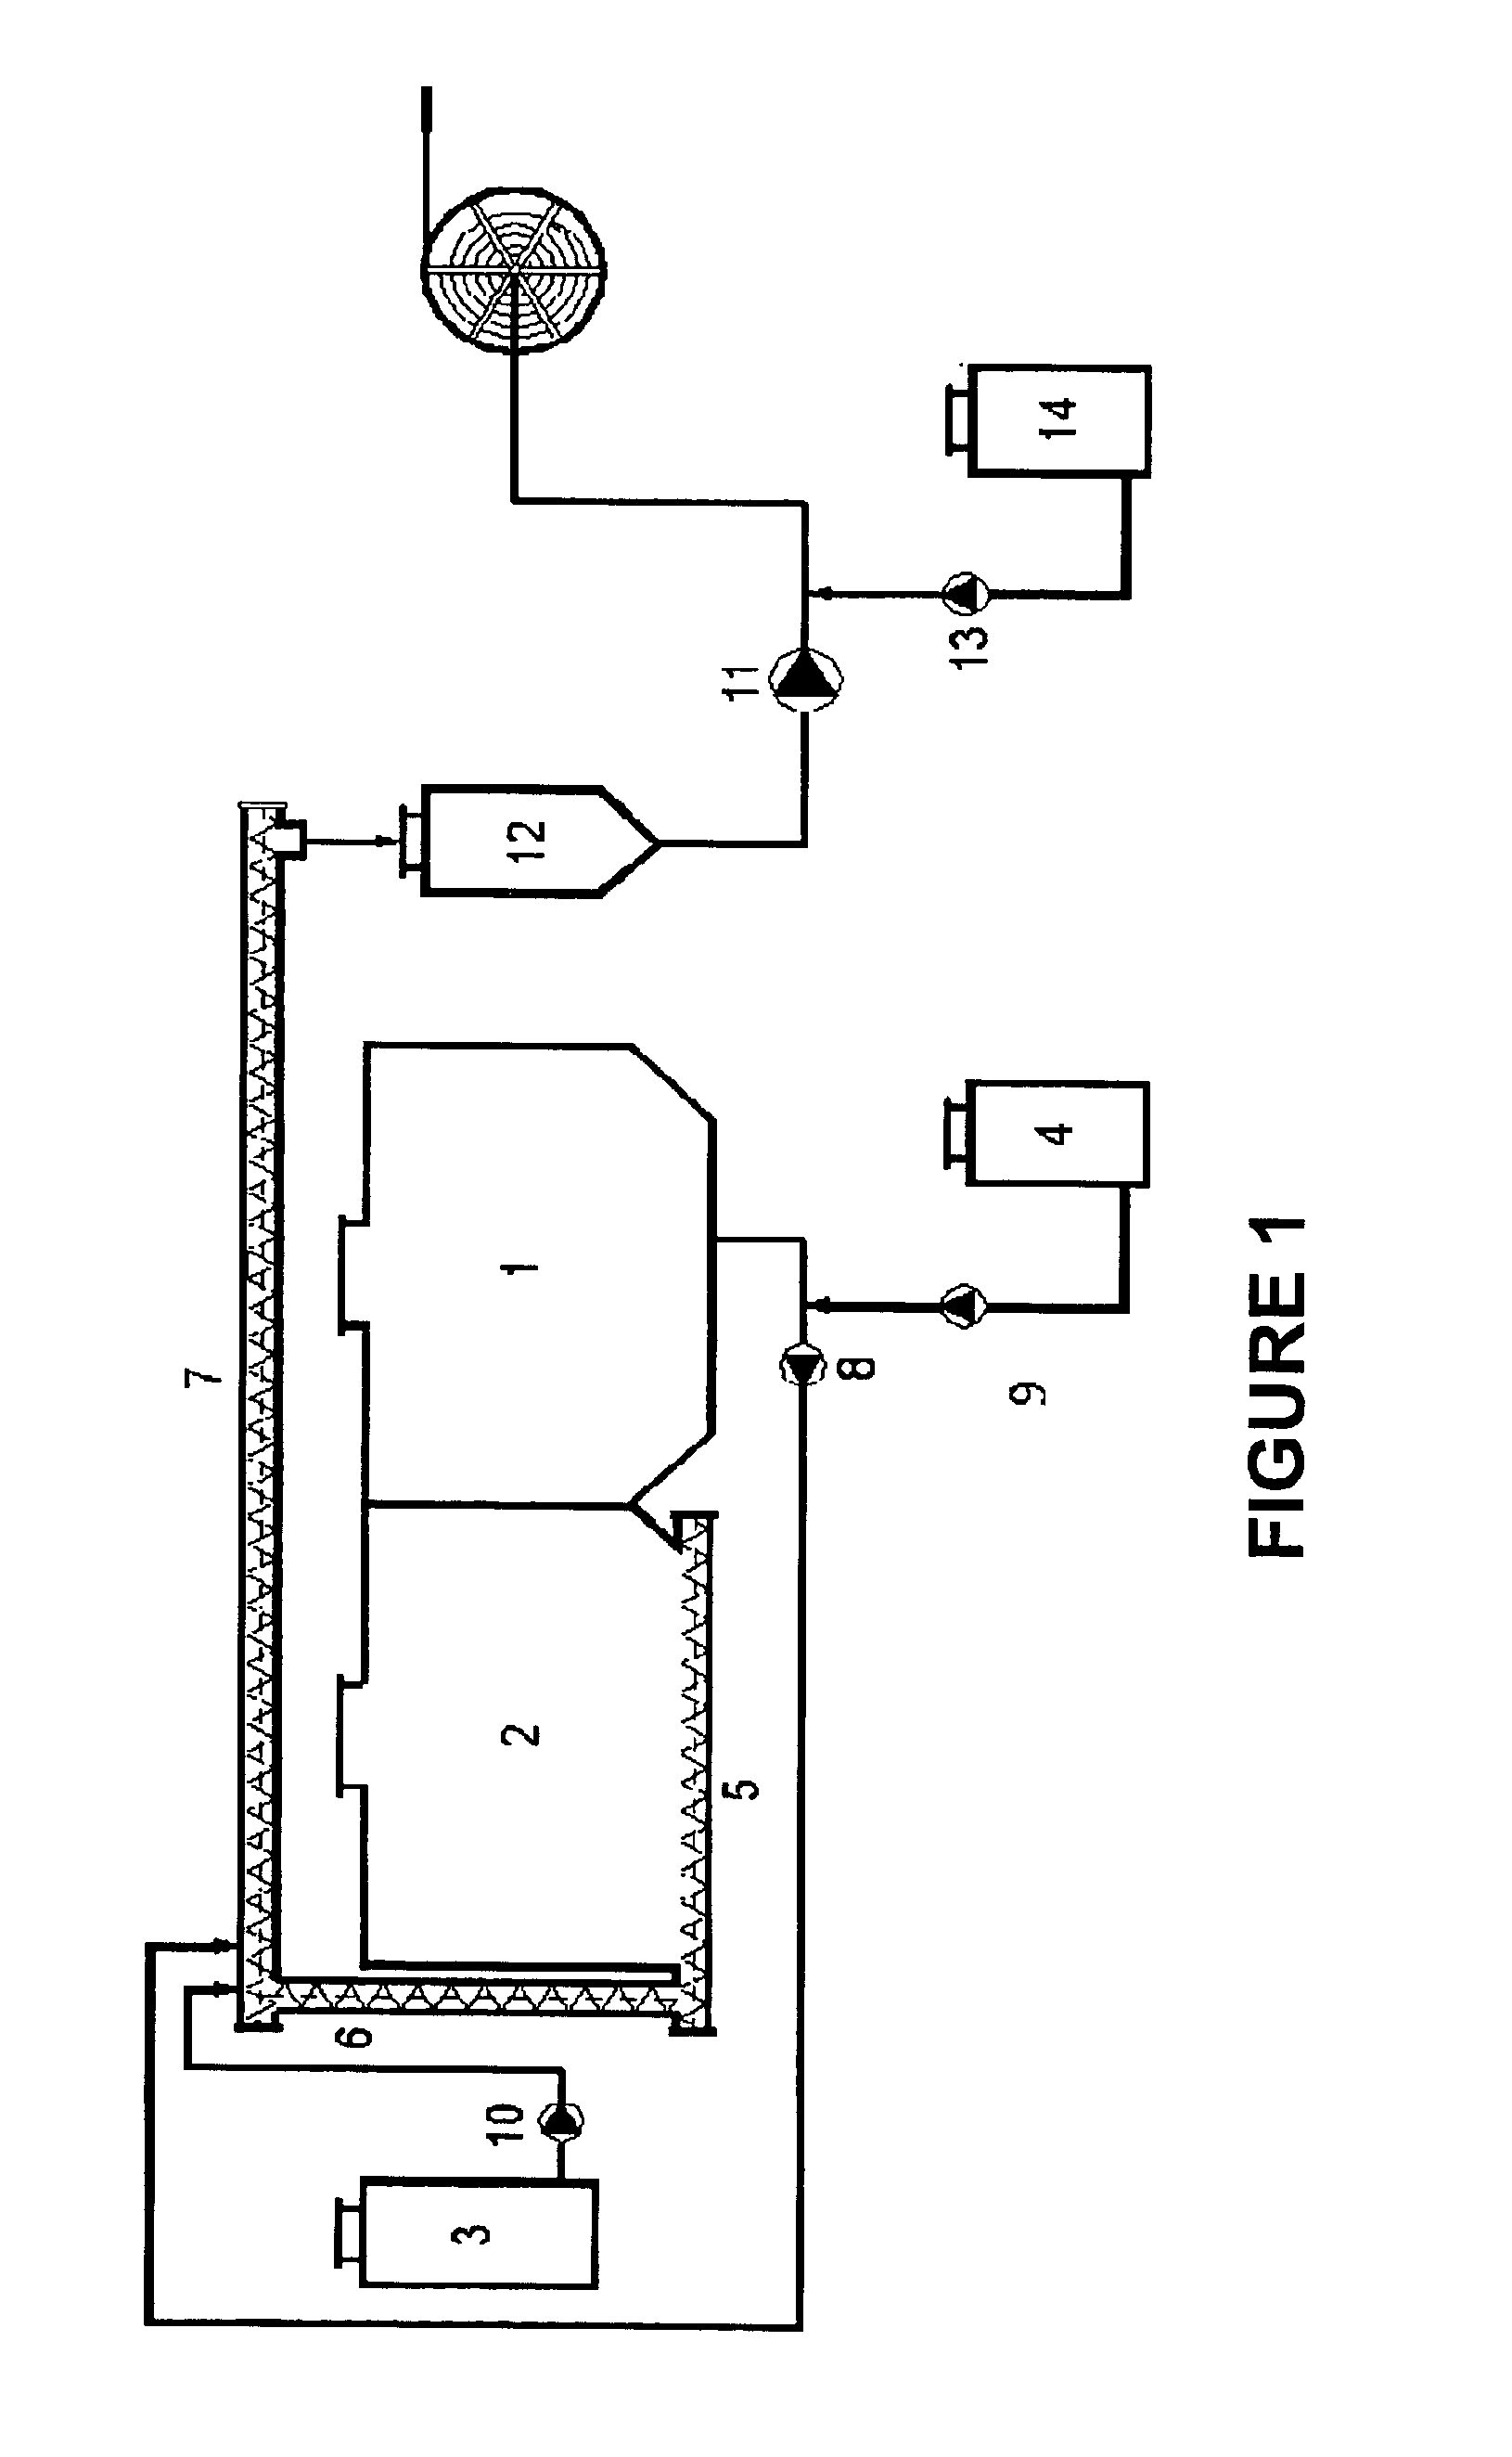 Process for the "in situ" manufacturing of explosive mixtures